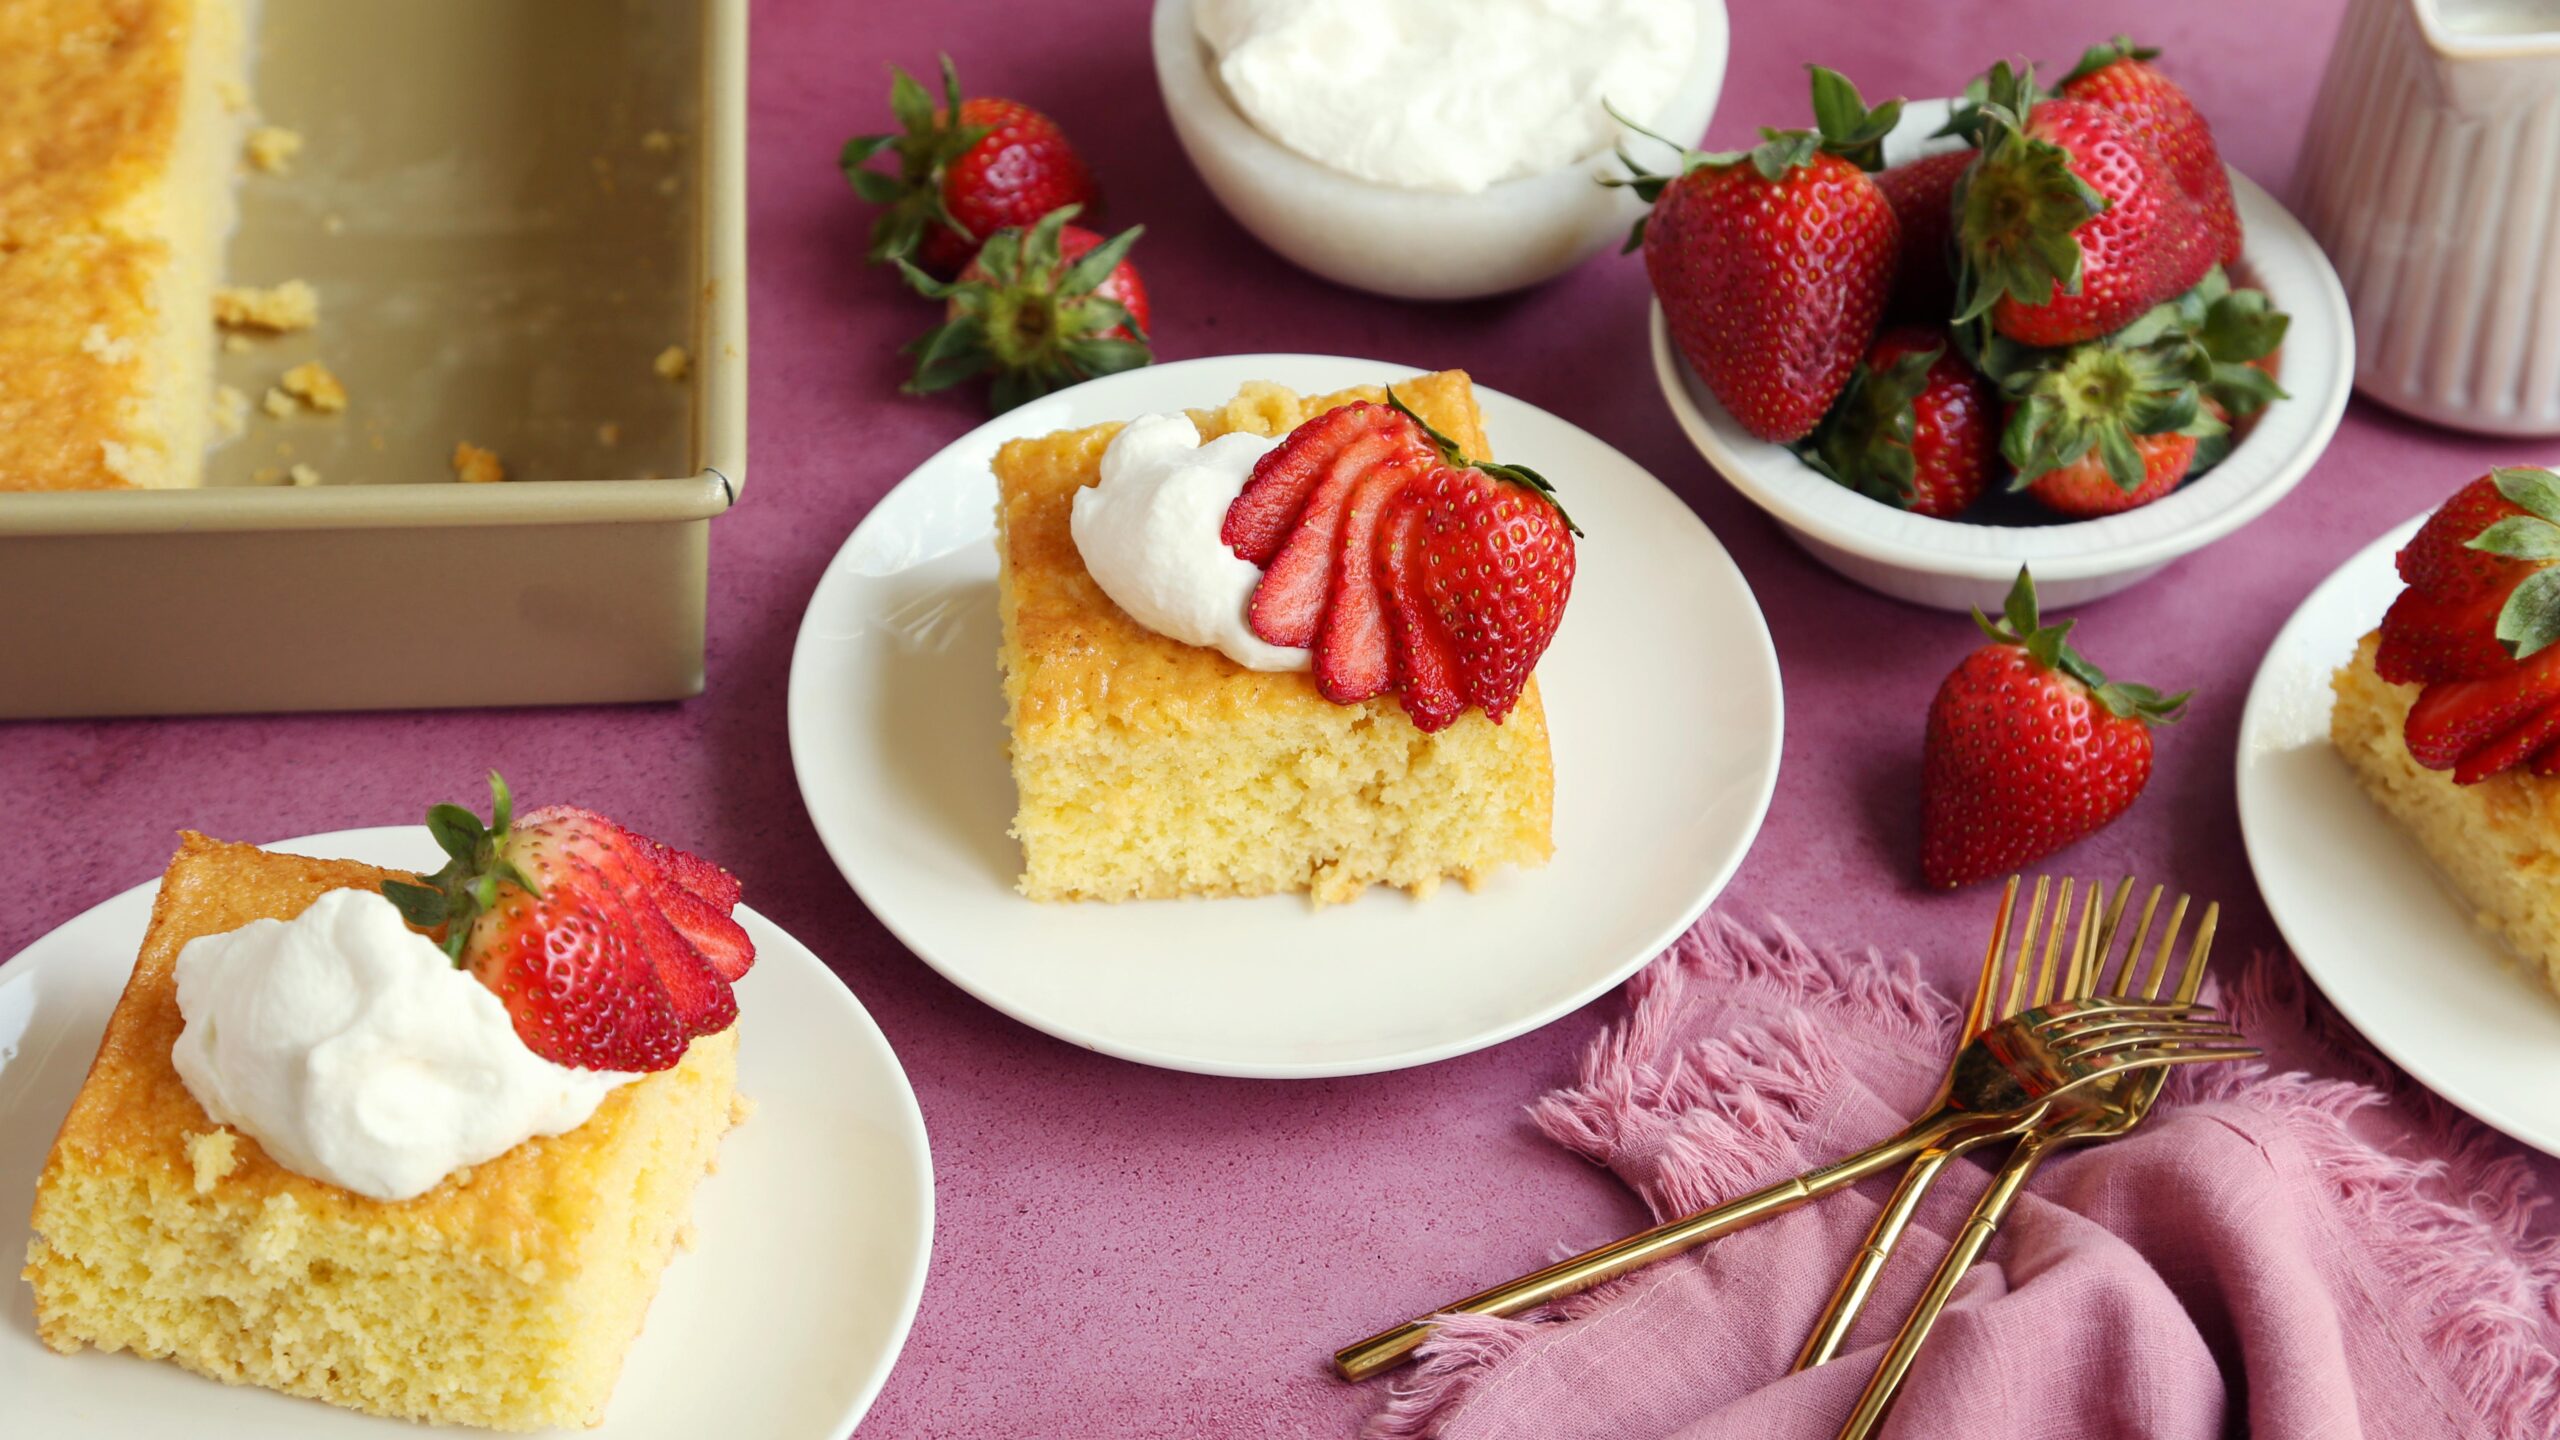 Sure, here are 11 creative photo captions for the Tres Leches Cake recipe: